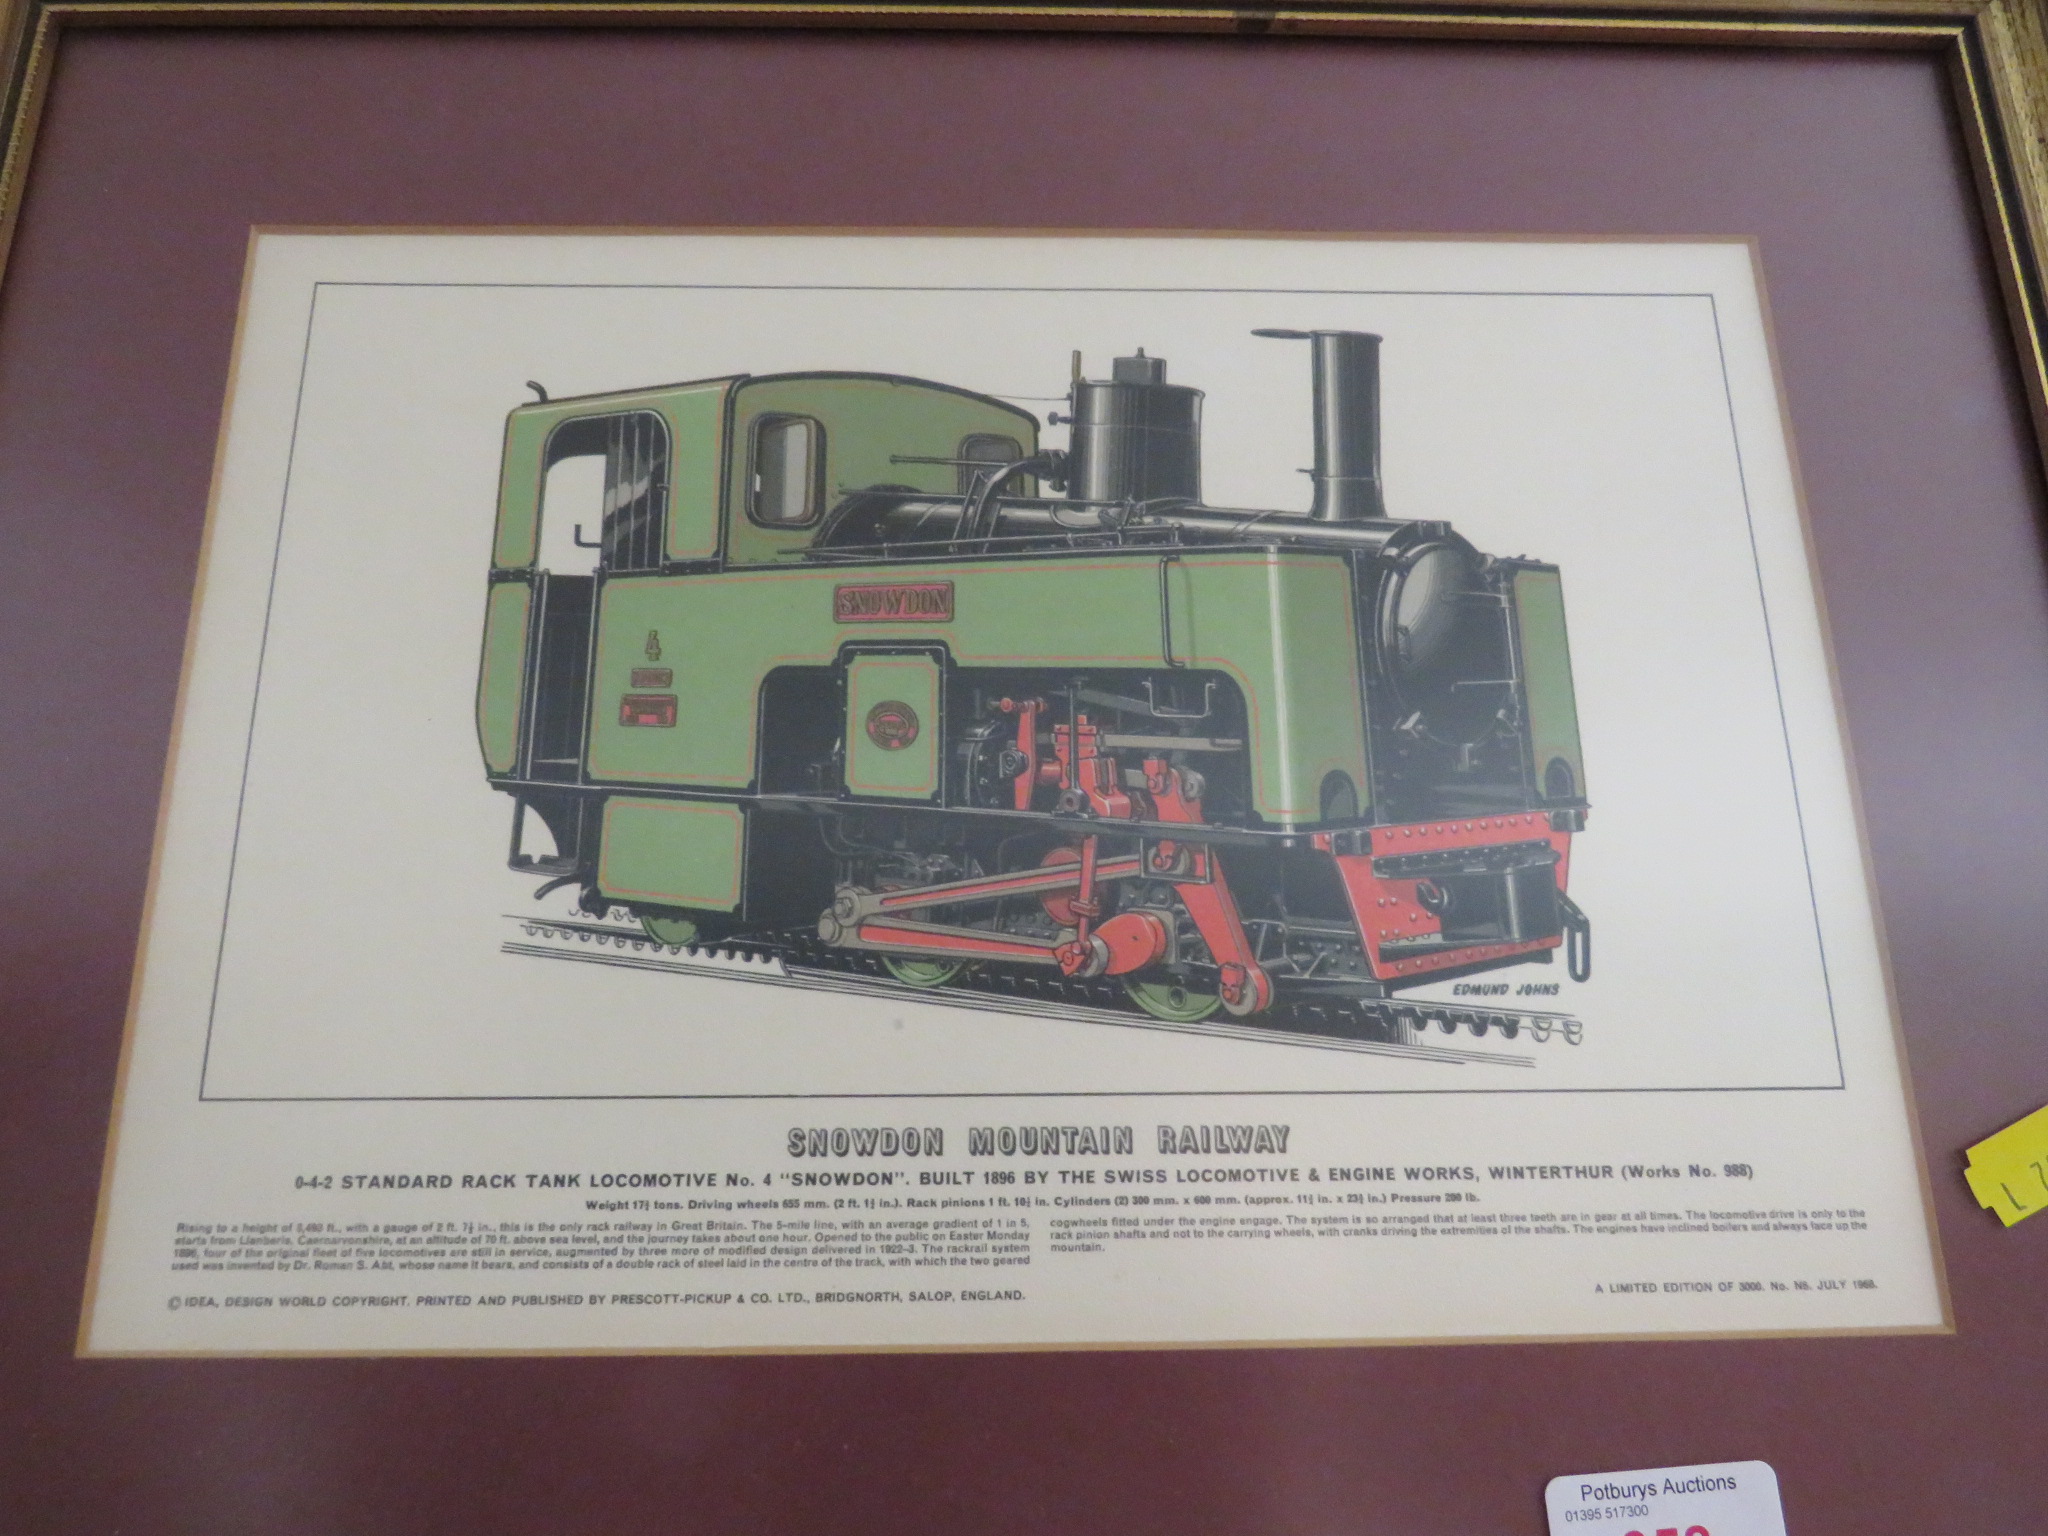 FRAMED AND MOUNTED PICTURE OF LOCOMOTIVE 'SNOWDON MOUNTAIN RAILWAY', TOGETHER WITH LIMITED EDITION - Image 2 of 3